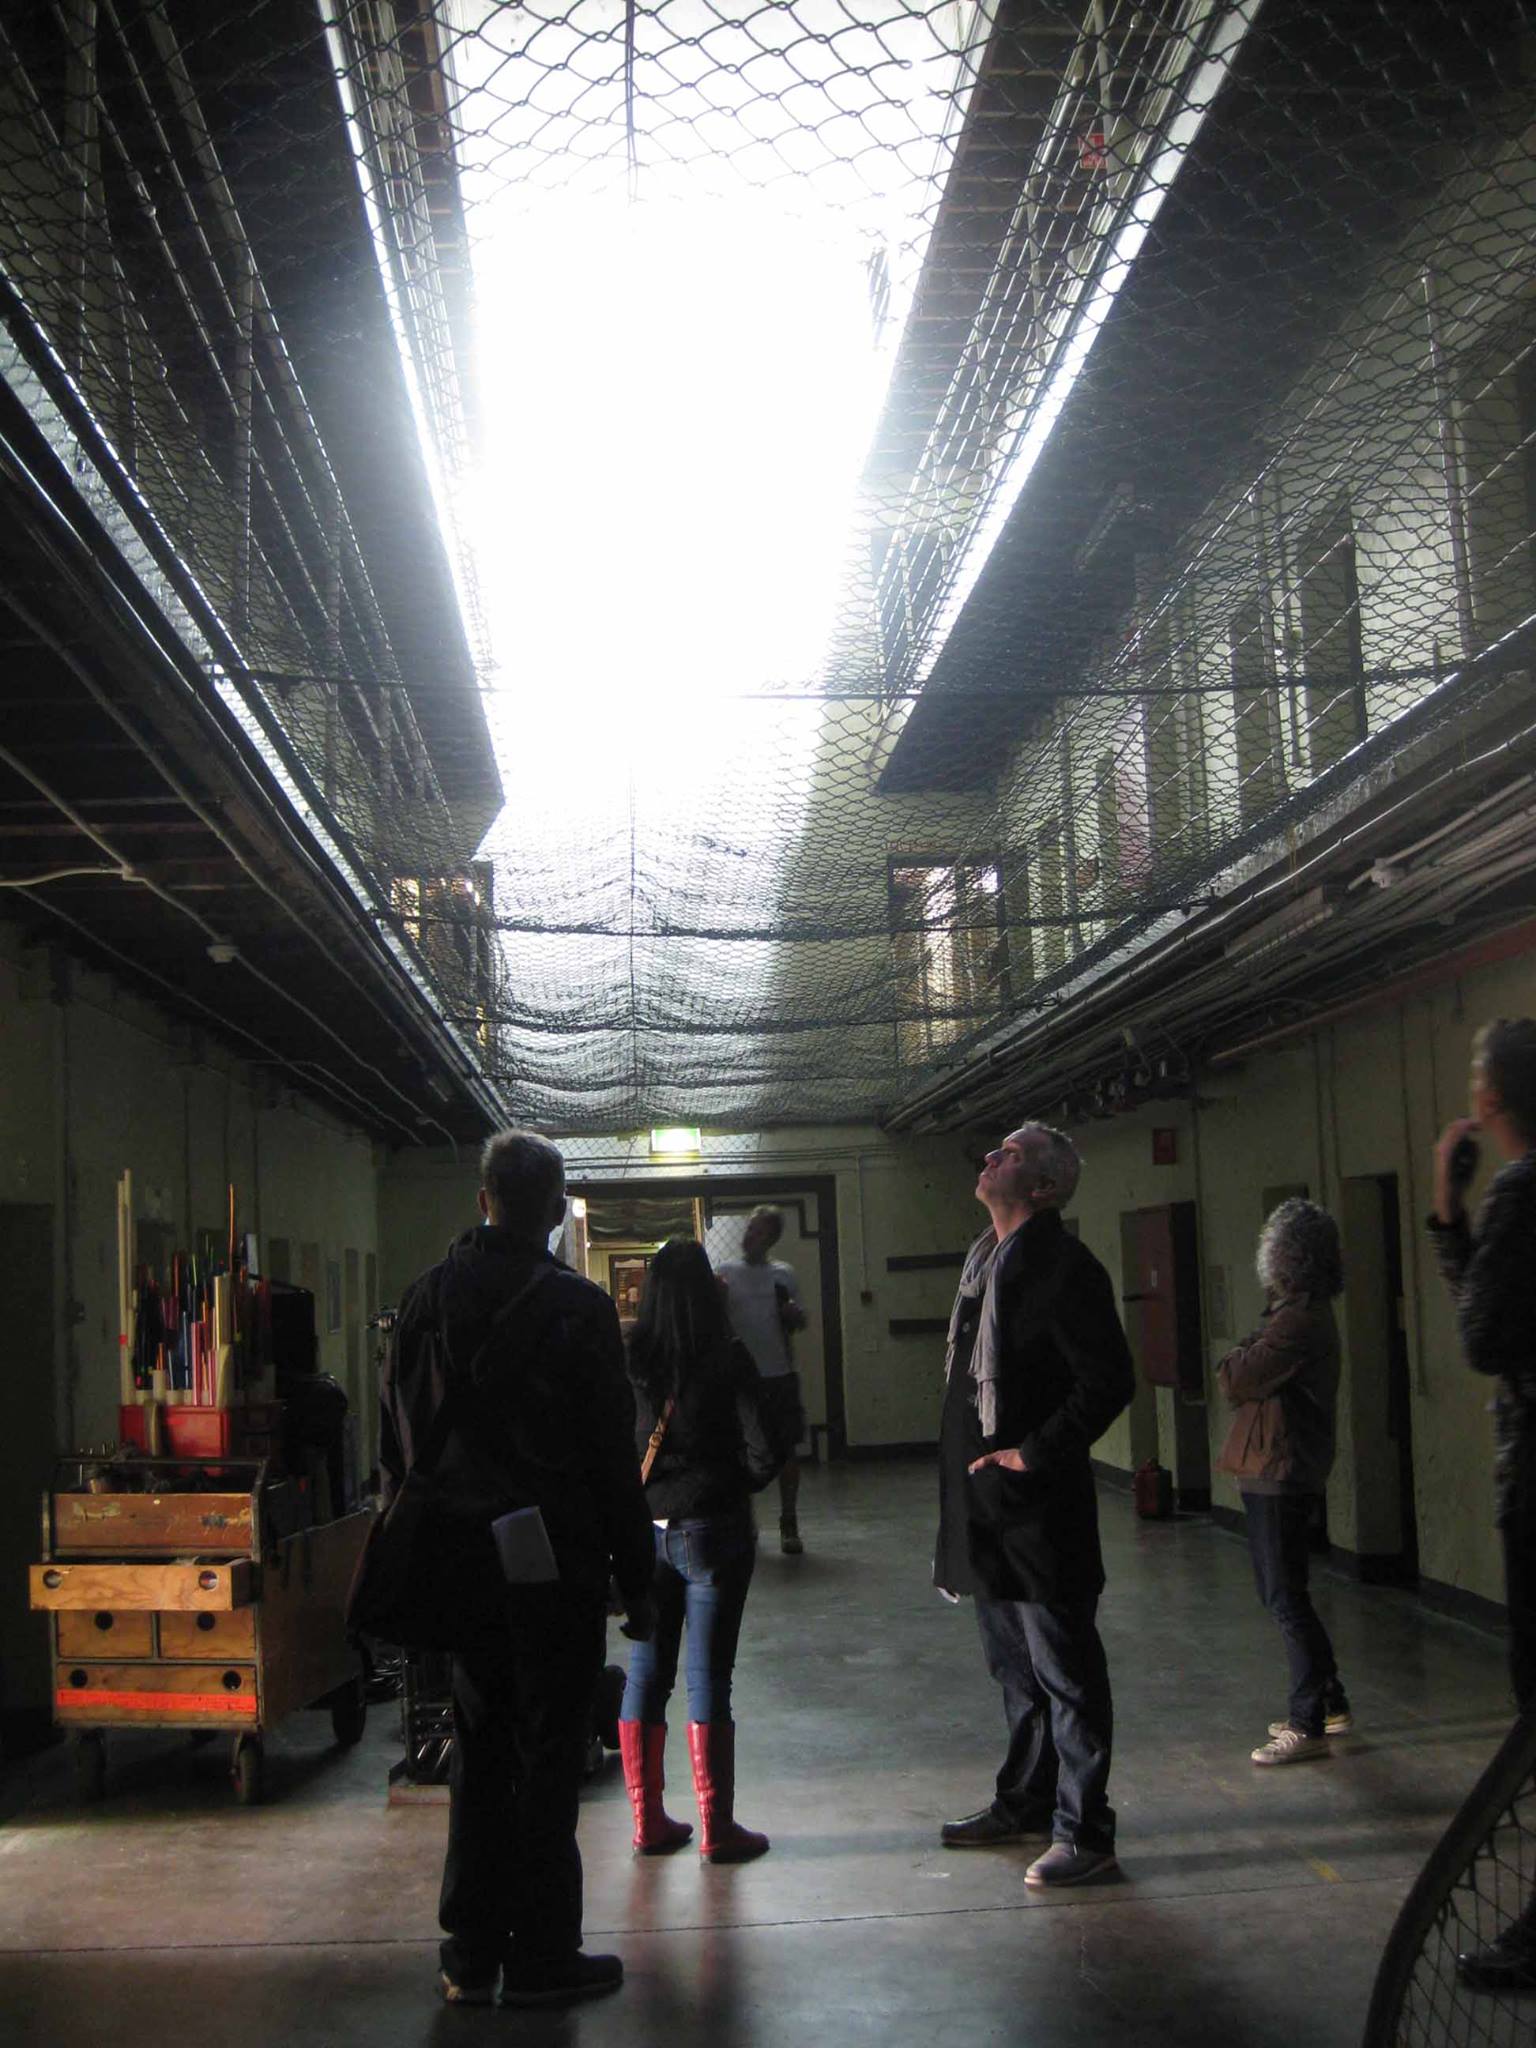 On the set of 'The Fenian Preview'. Fremantle Prison, Western Australia 2014.